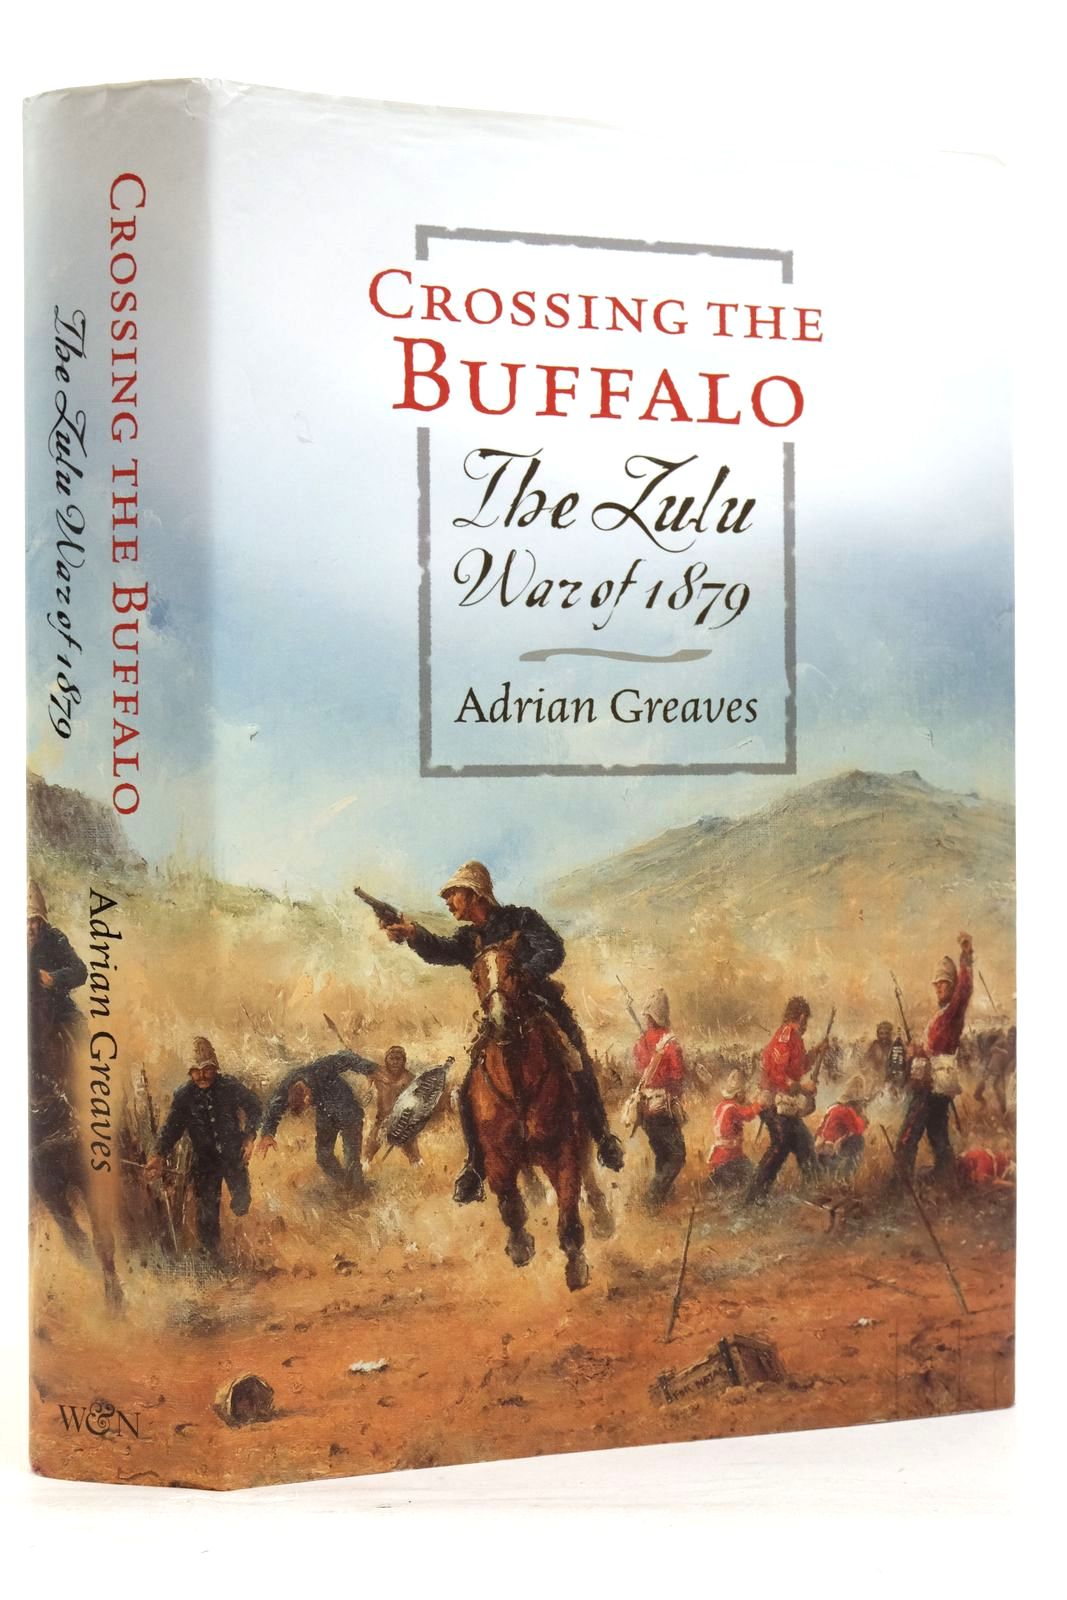 Photo of CROSSING THE BUFFALO THE ZULU WAR OF 1879 written by Greaves, Adrian published by Weidenfeld and Nicolson (STOCK CODE: 2138037)  for sale by Stella & Rose's Books